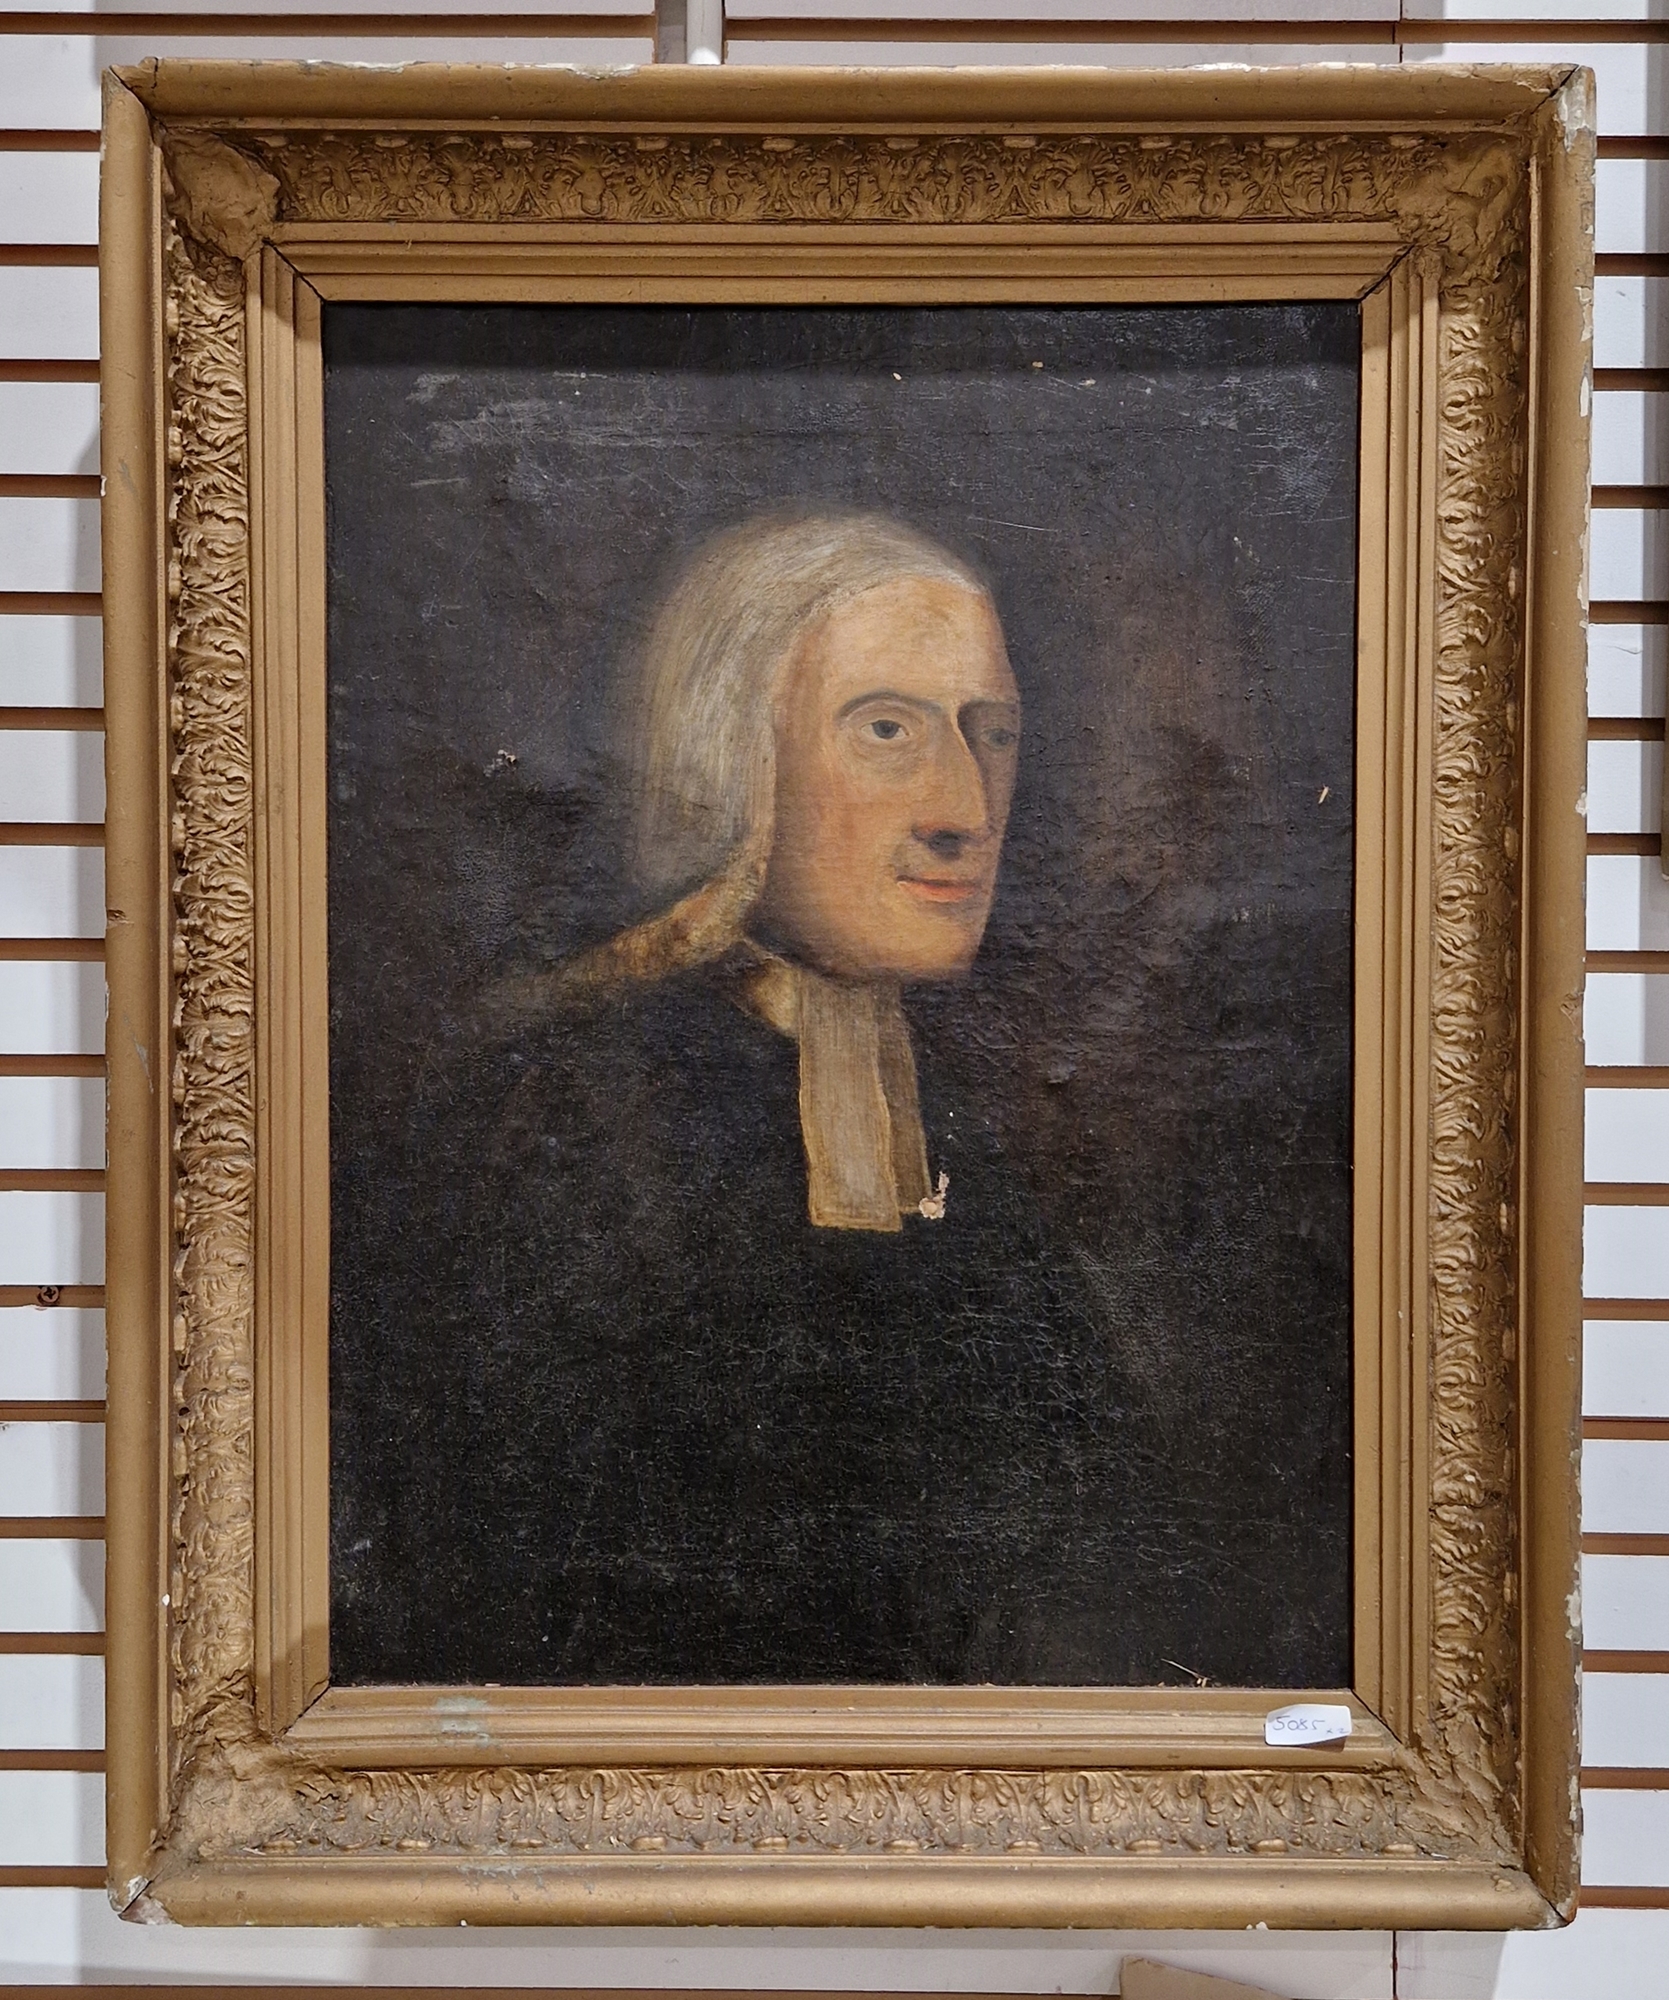 Late 18th/19th Century British School Oil on canvas Portrait of a gentleman, possibly John Wesley, - Image 2 of 3